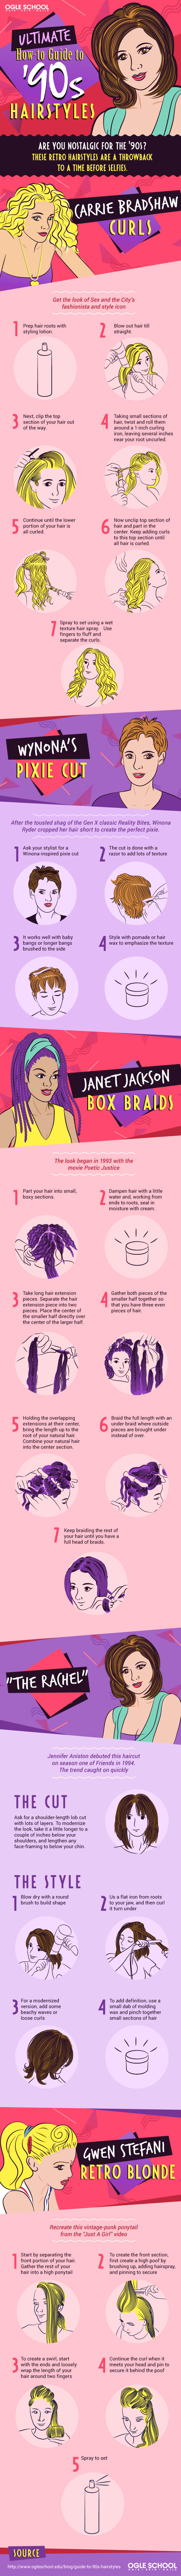 Ultimate How-To Guide for ‘90s Hairstyles